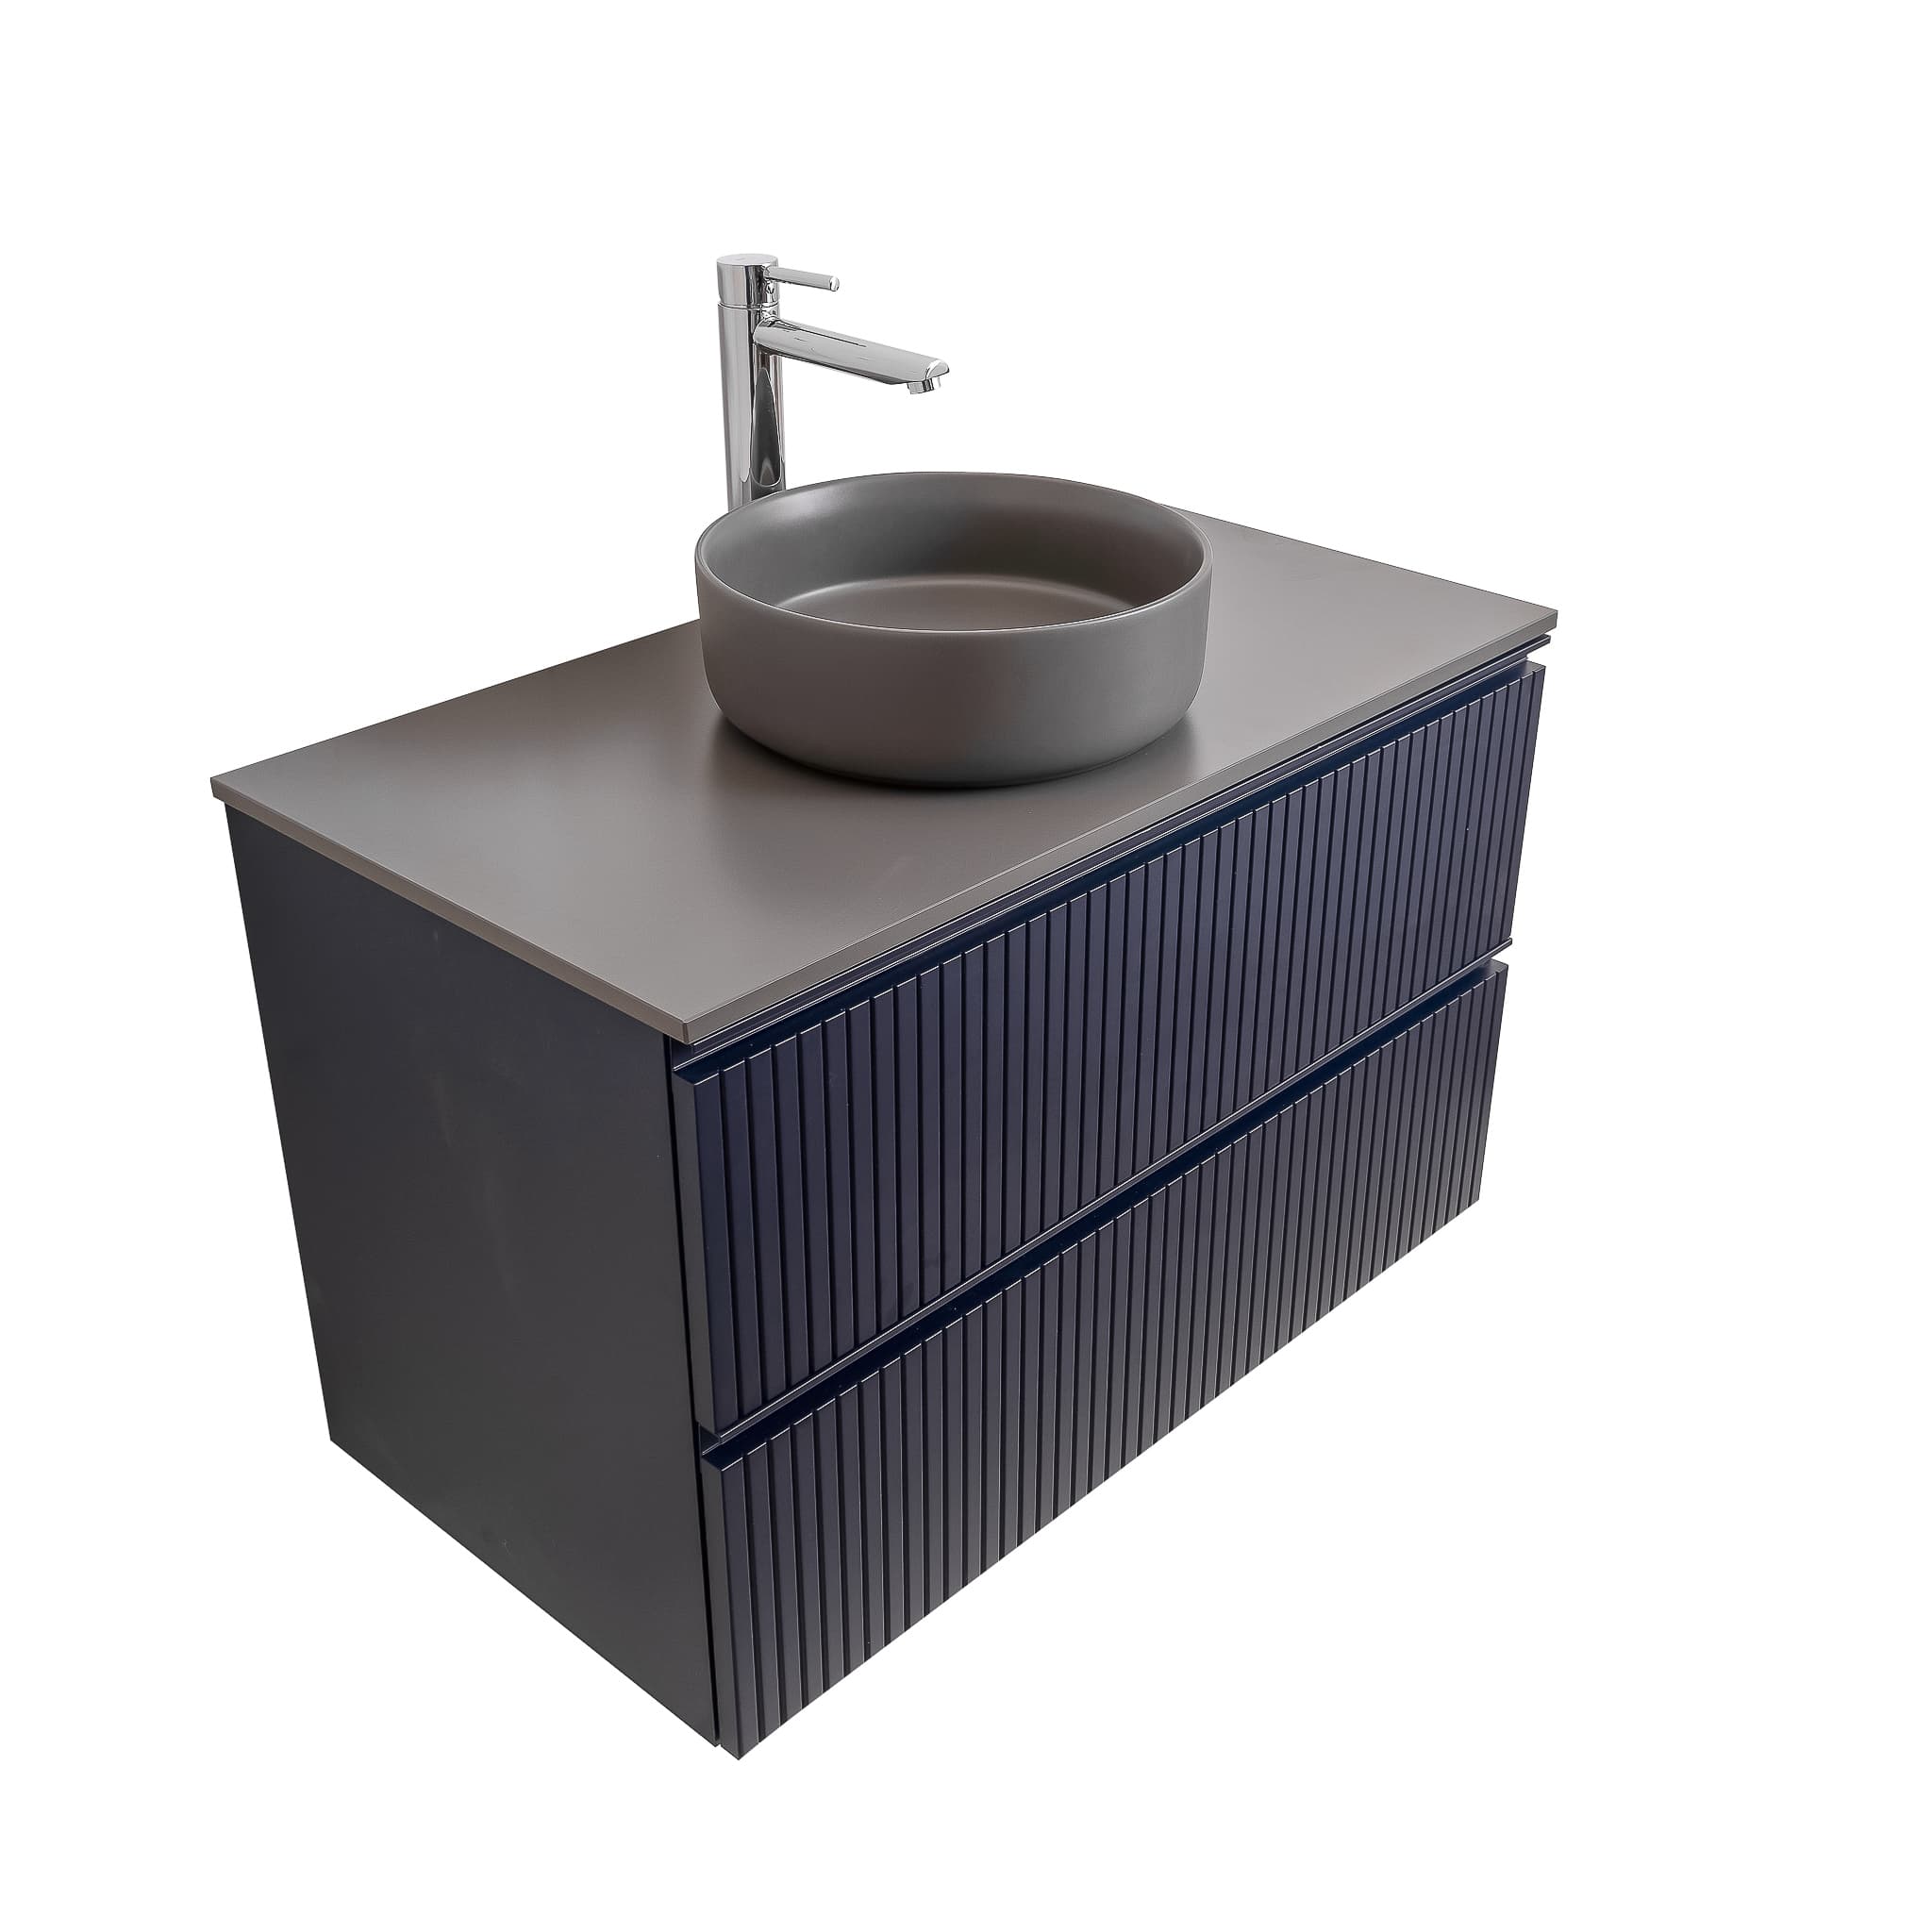 Ares 31.5 Matte Navy Blue Cabinet, Ares Grey Ceniza Top And Ares Grey Ceniza Ceramic Basin, Wall Mounted Modern Vanity Set